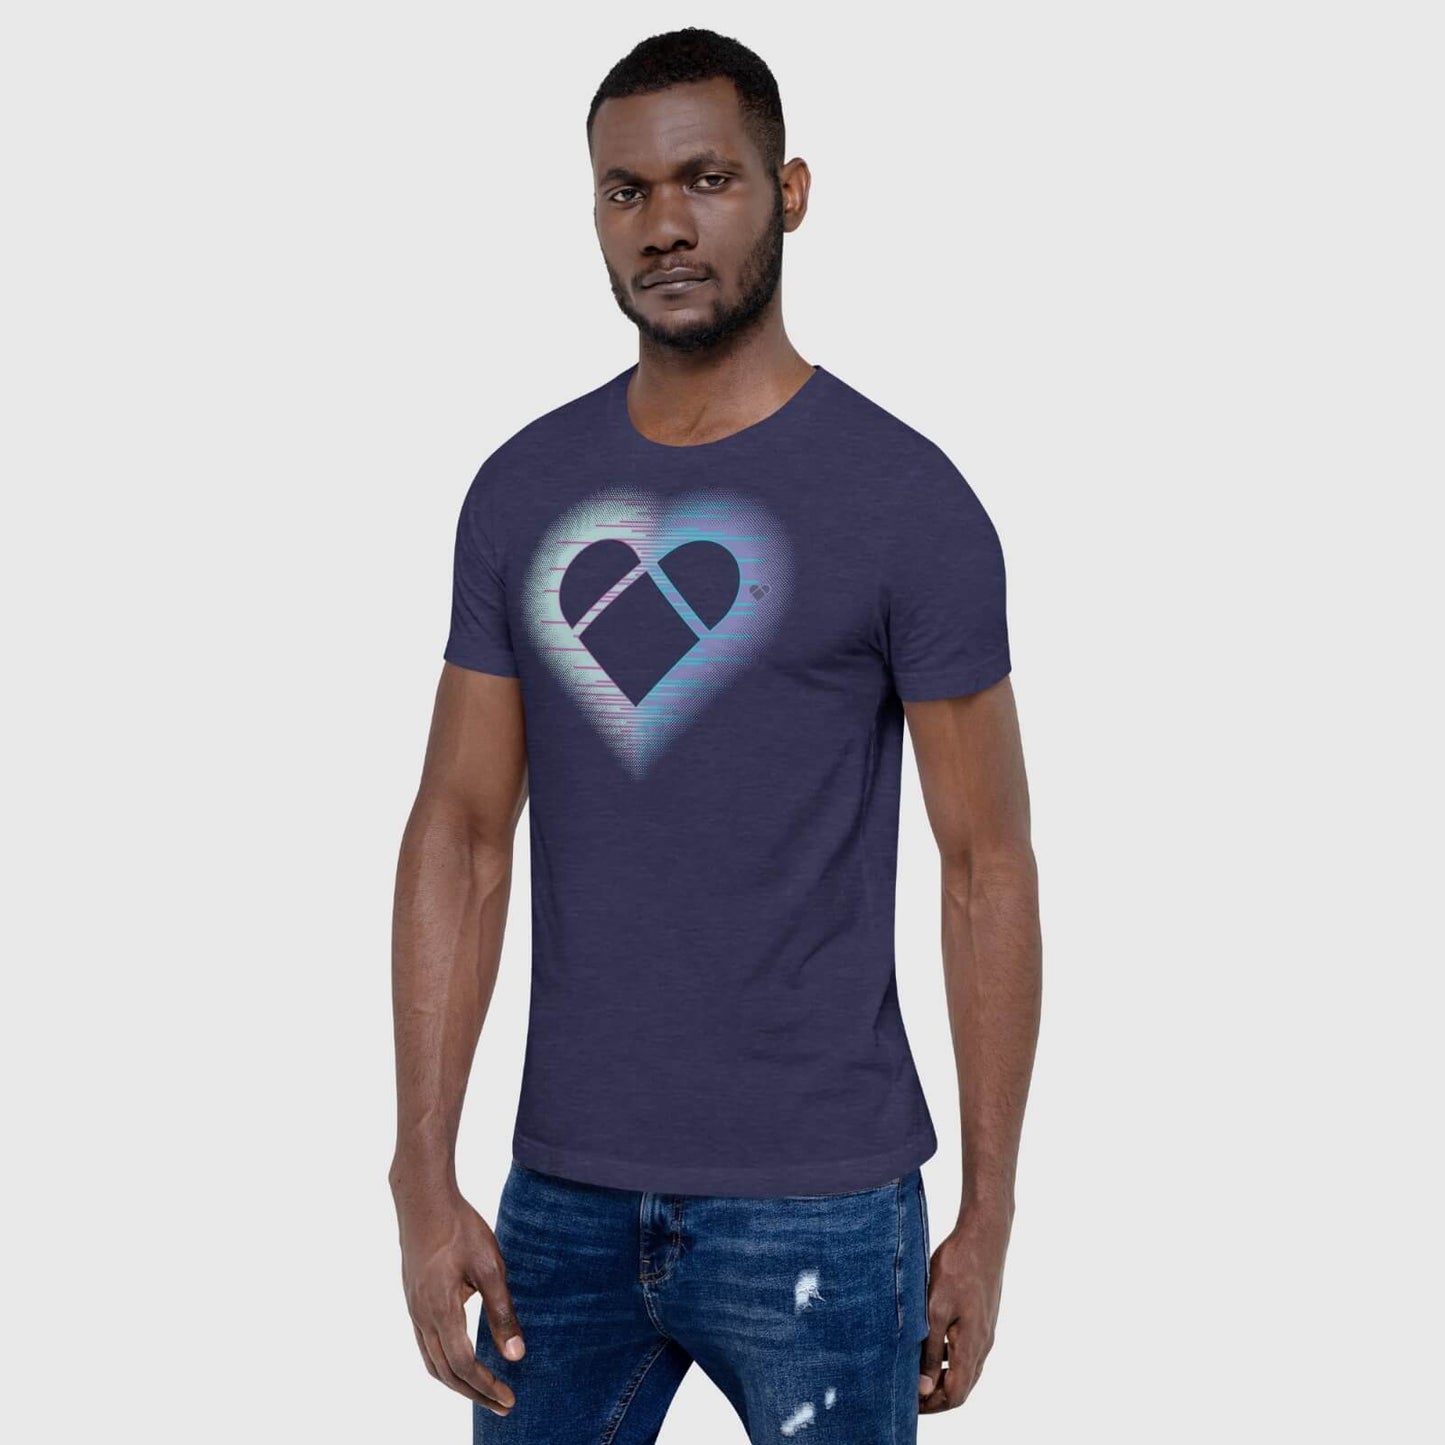 Mint and periwinkle love t-shirt by CRiZ AMOR.